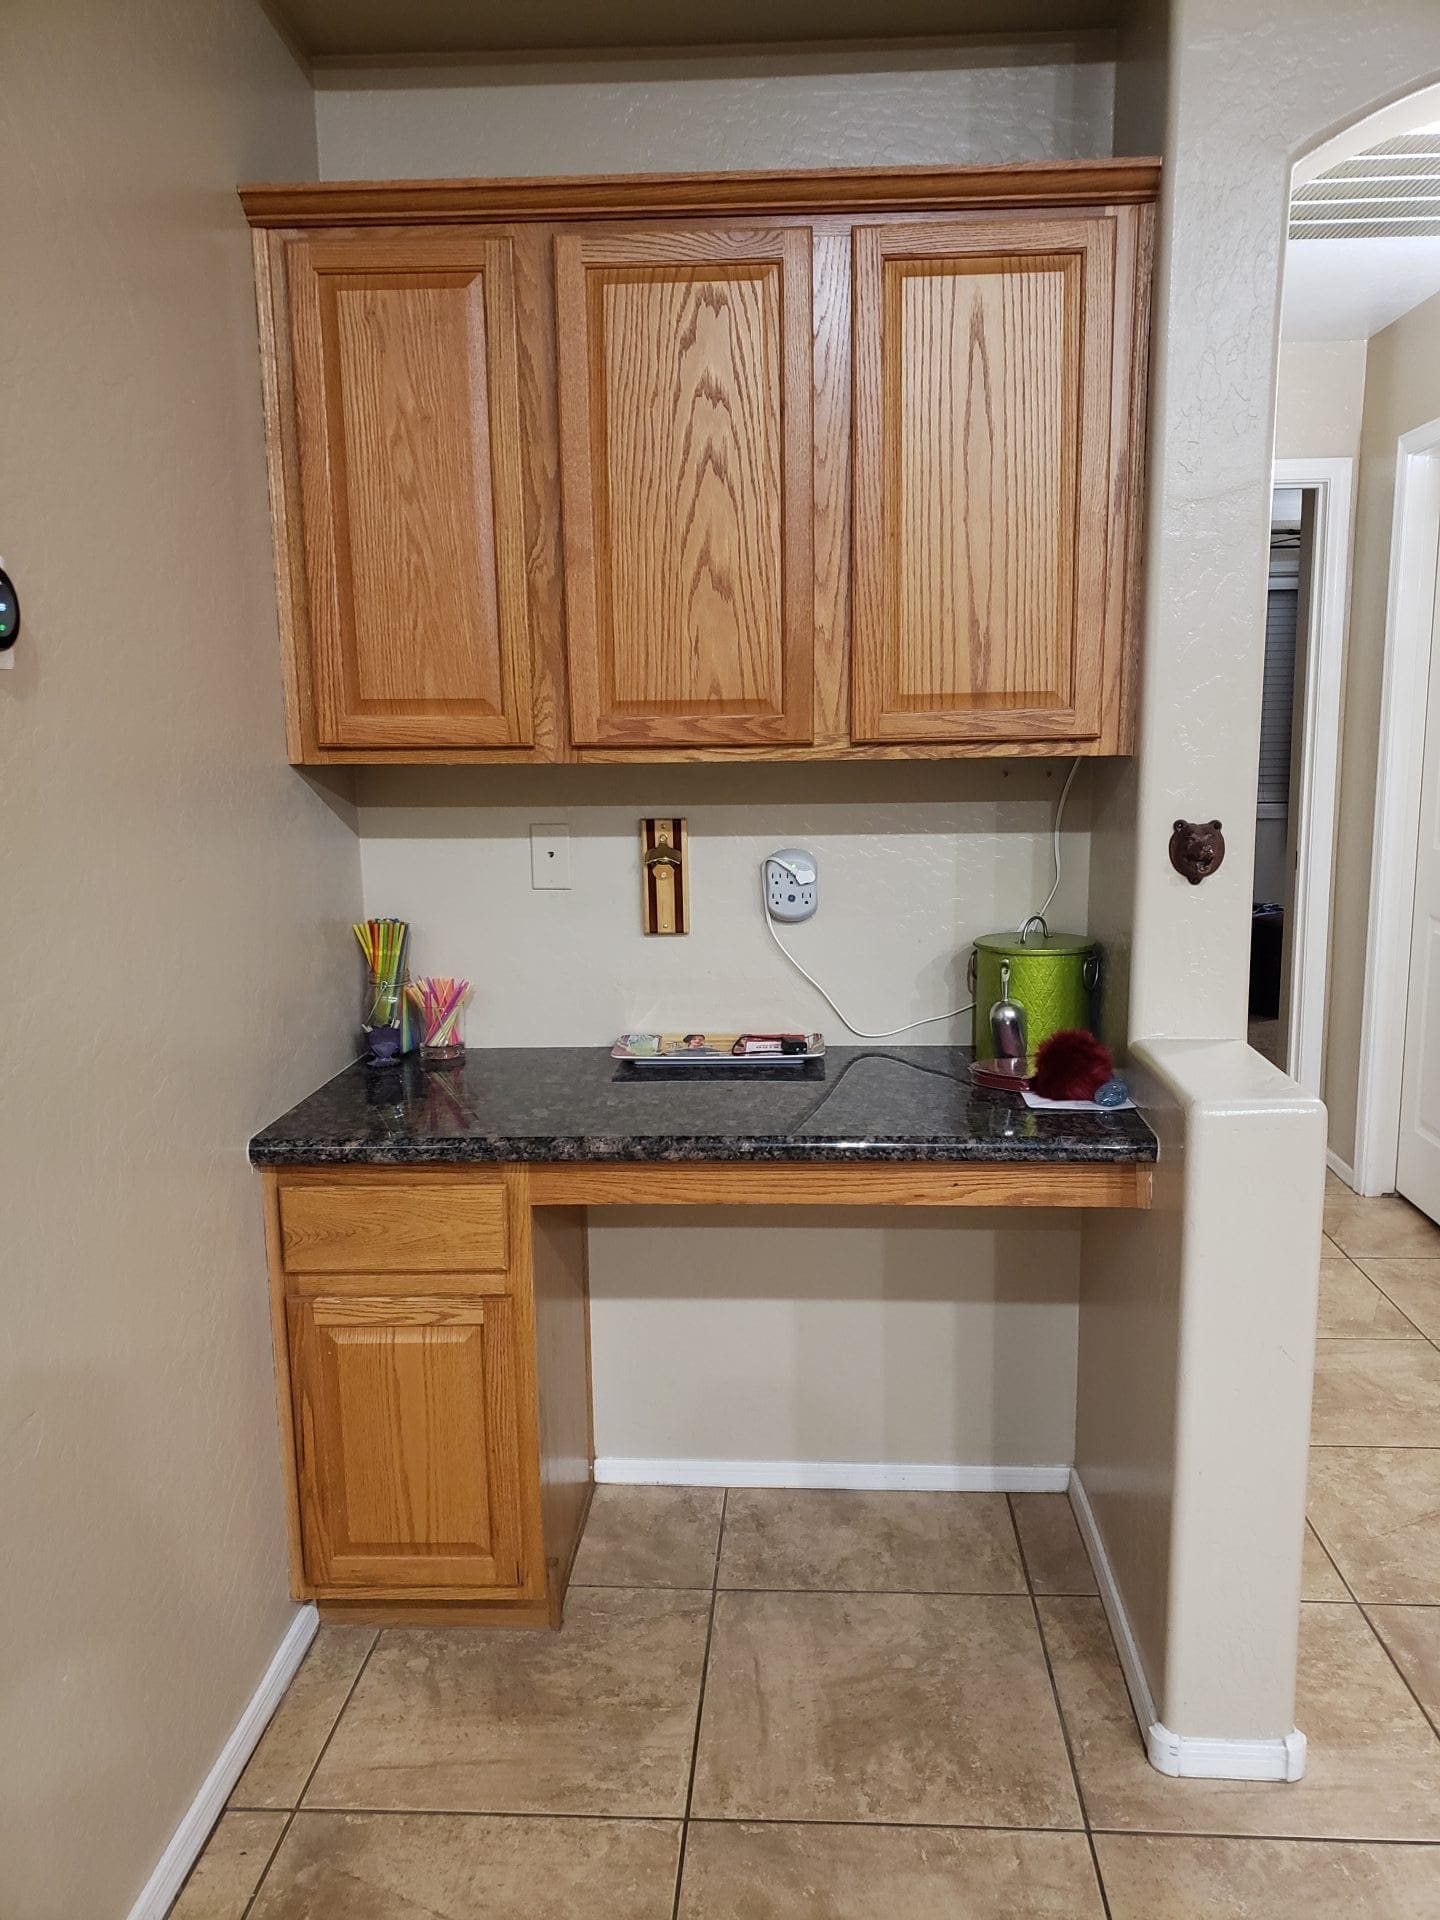 Arizona Painting Company offers Cabinet Painting: Newly painted cabinets bring a fresh and stylish transformation to any space. Old cabinets before being painted, currently brown.